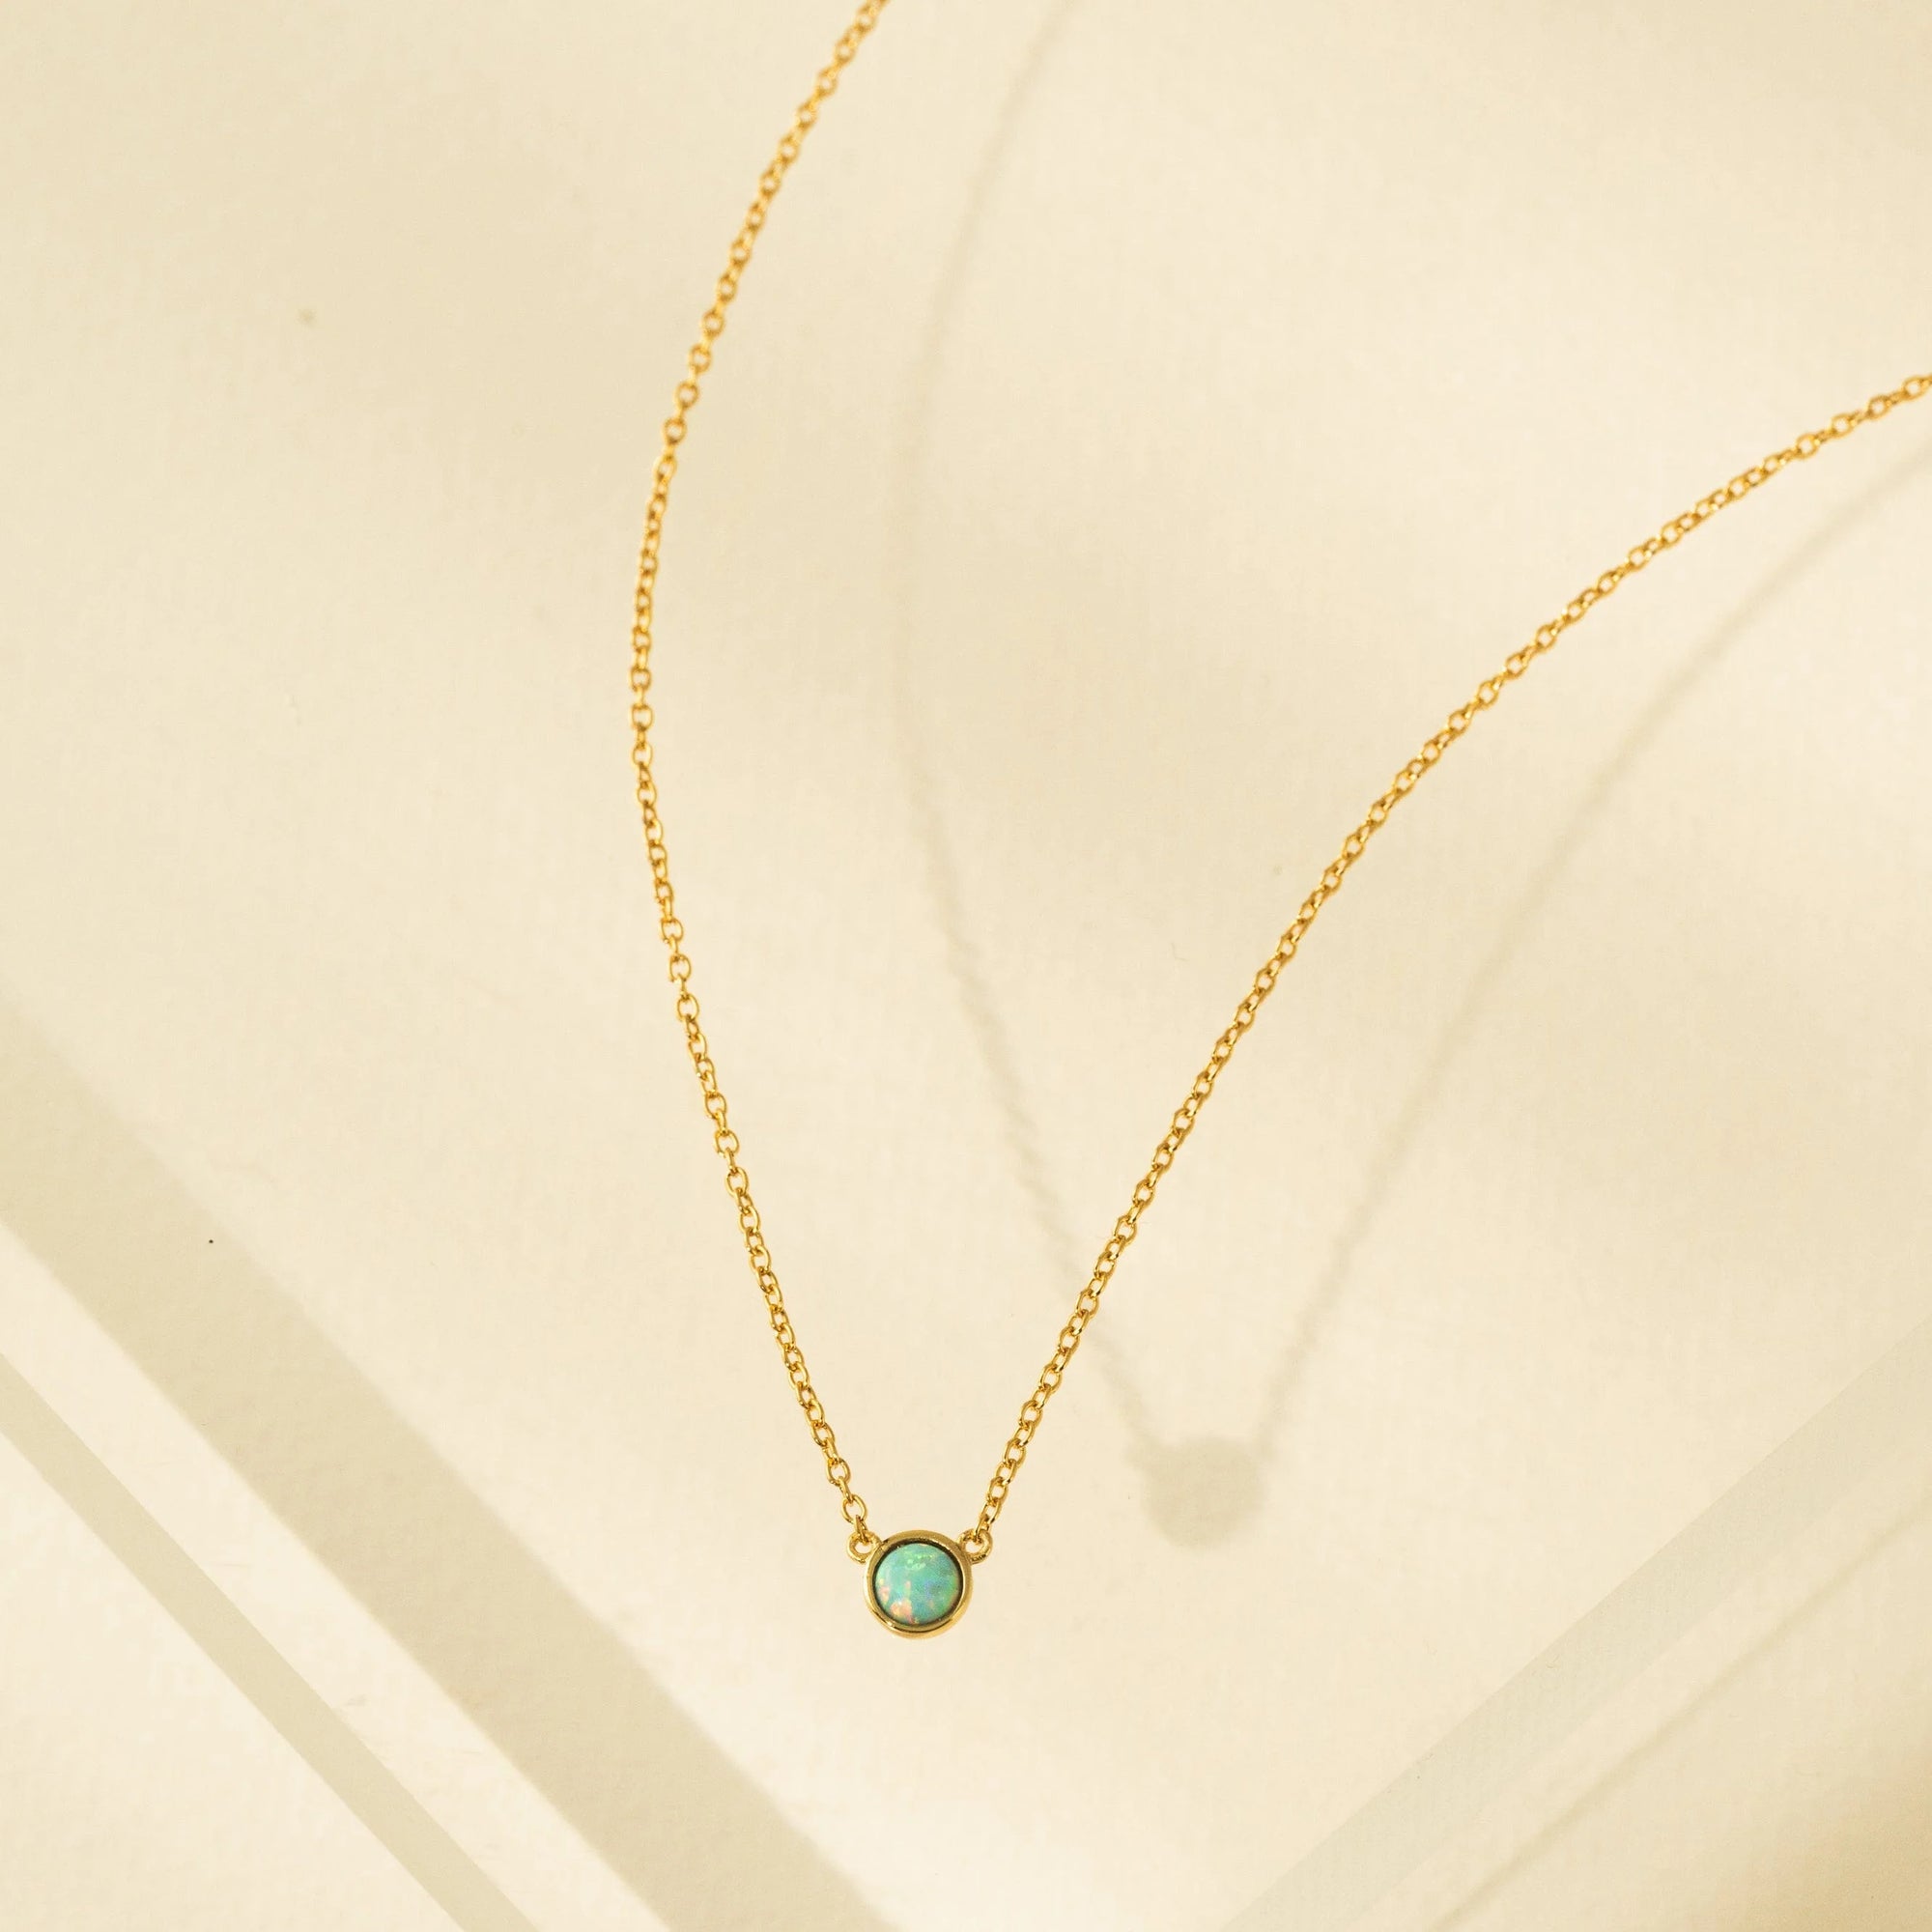 Lovers Tempo Opal Necklace - Blue Opal